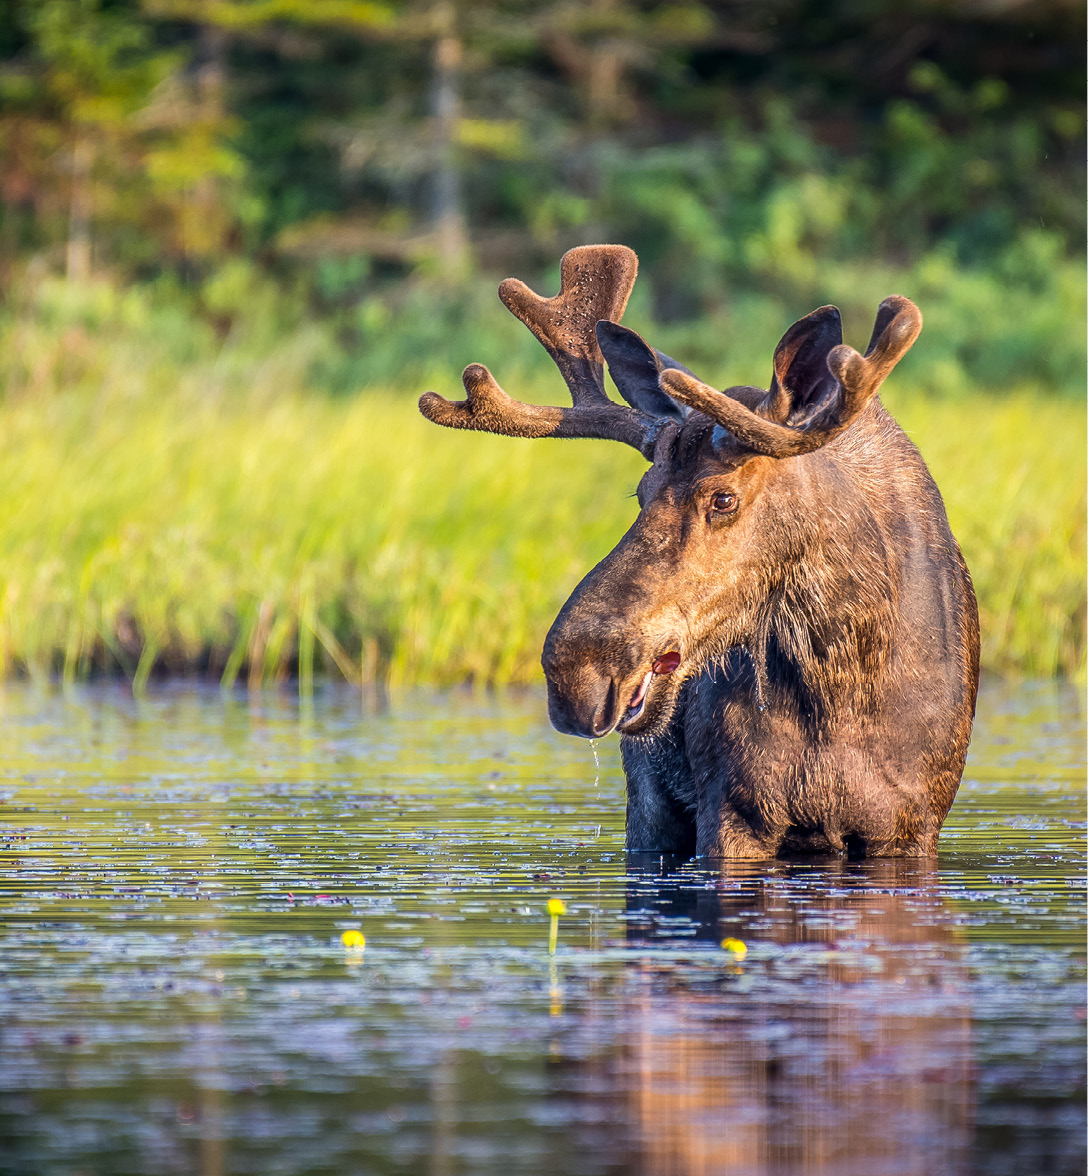 A bull moose eating lily pads in the lake in early morning. Shot in Algonquin Provincial Park, Ontario, Canada.